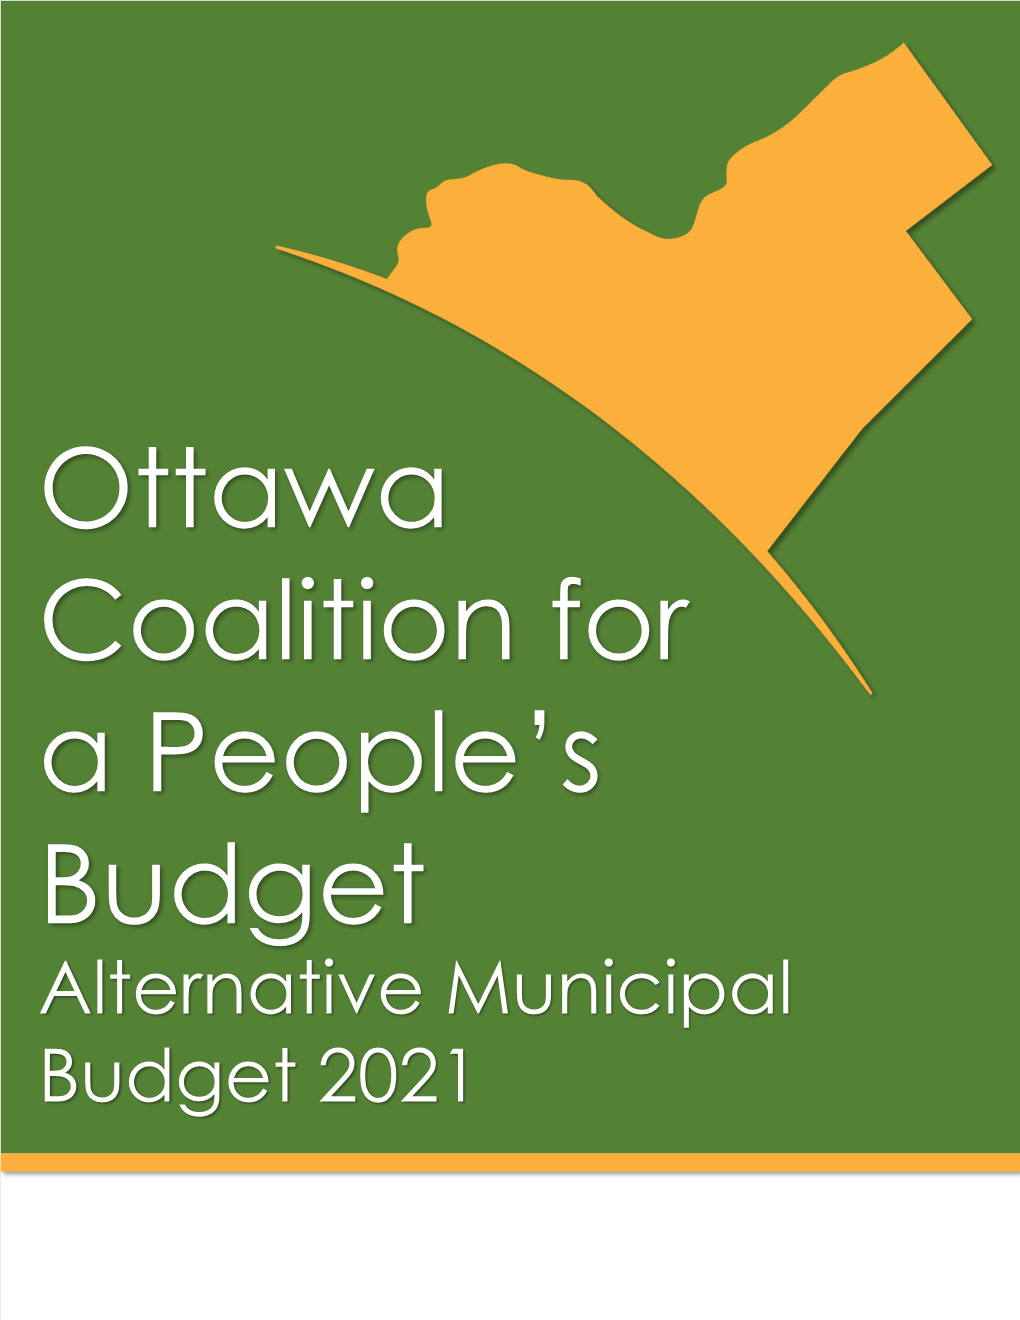 Ottawa Coalition for a People's Budget